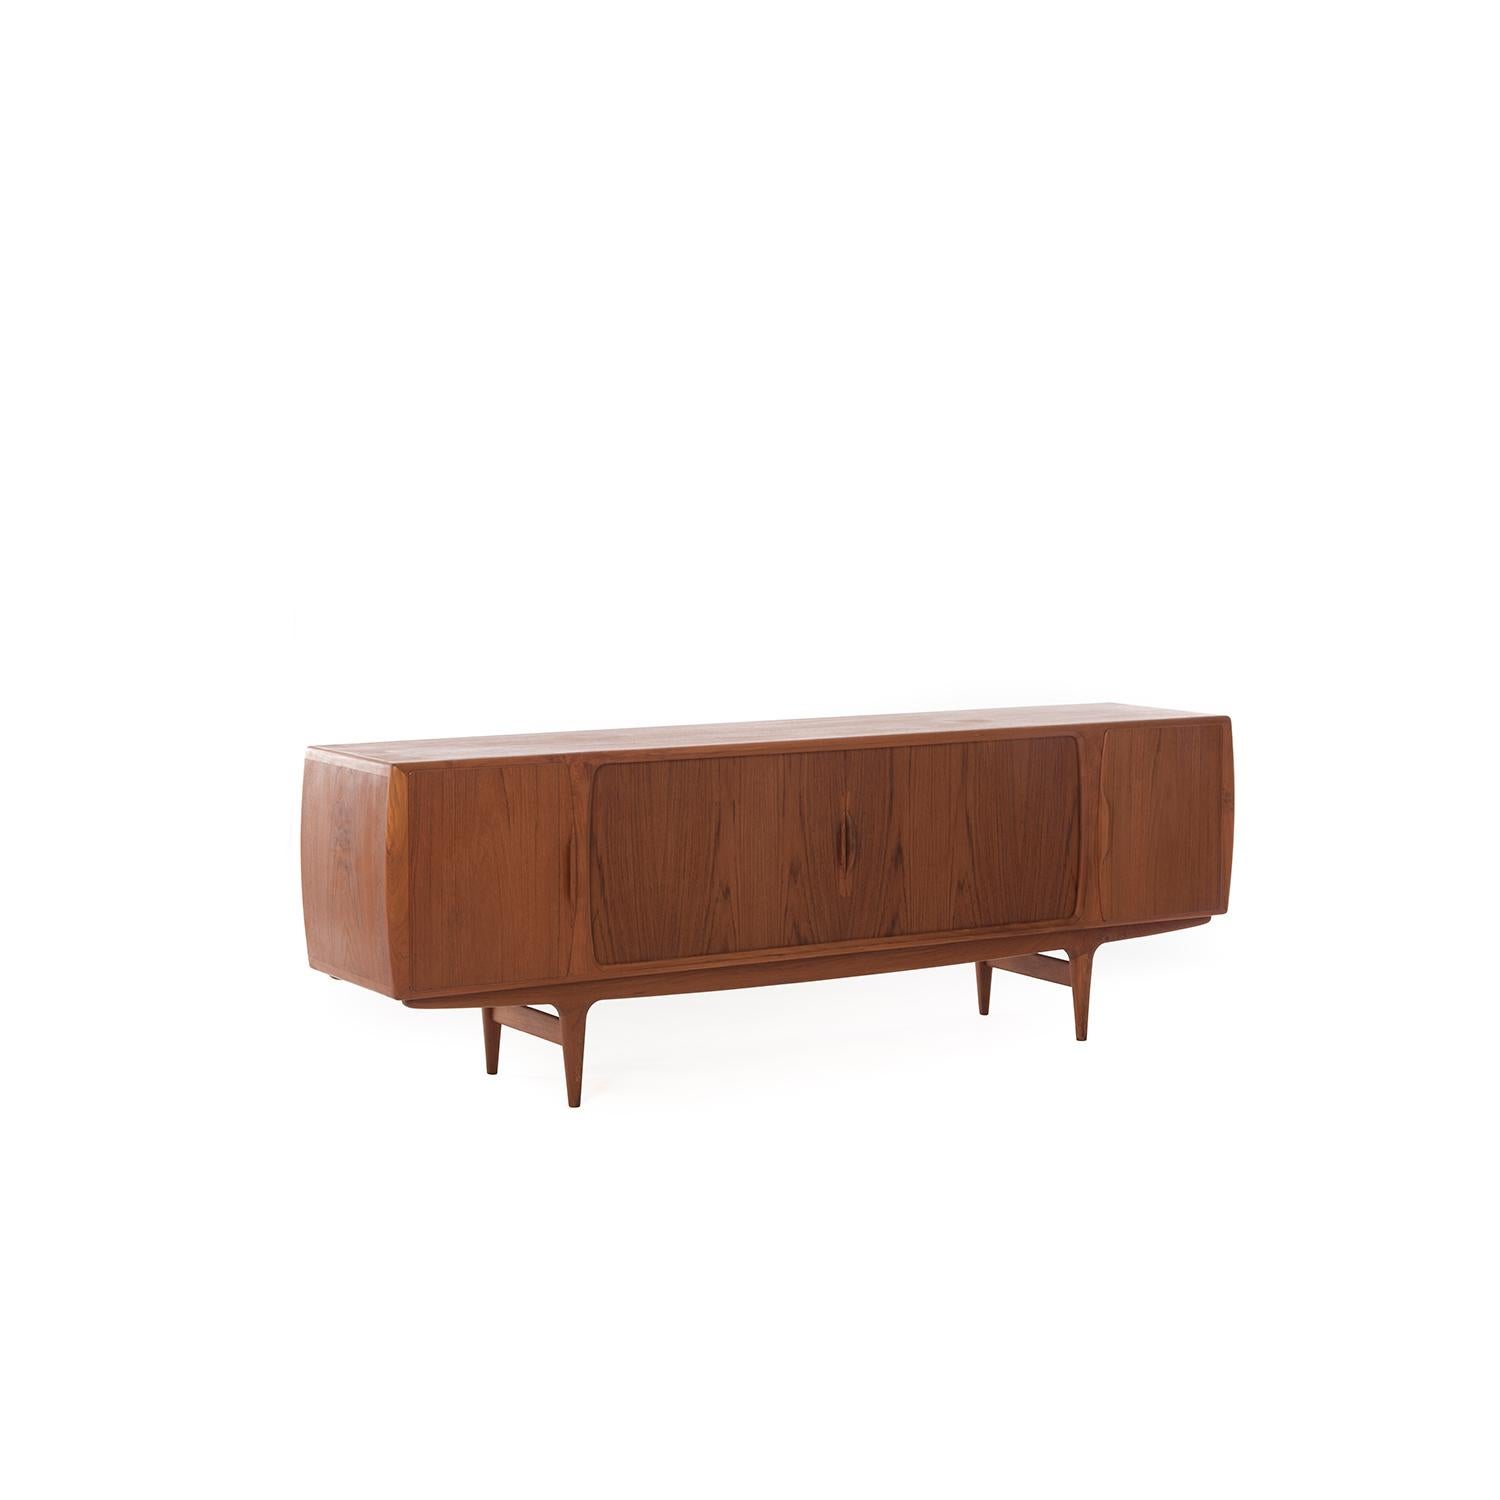 Danish Modern Classic credenza designed by Johannes Andersen. Oiled teak with adjustable shelves and pullout / pull-out lined silver drawers. Central doors are tambour style, outer doors are cupboard style.